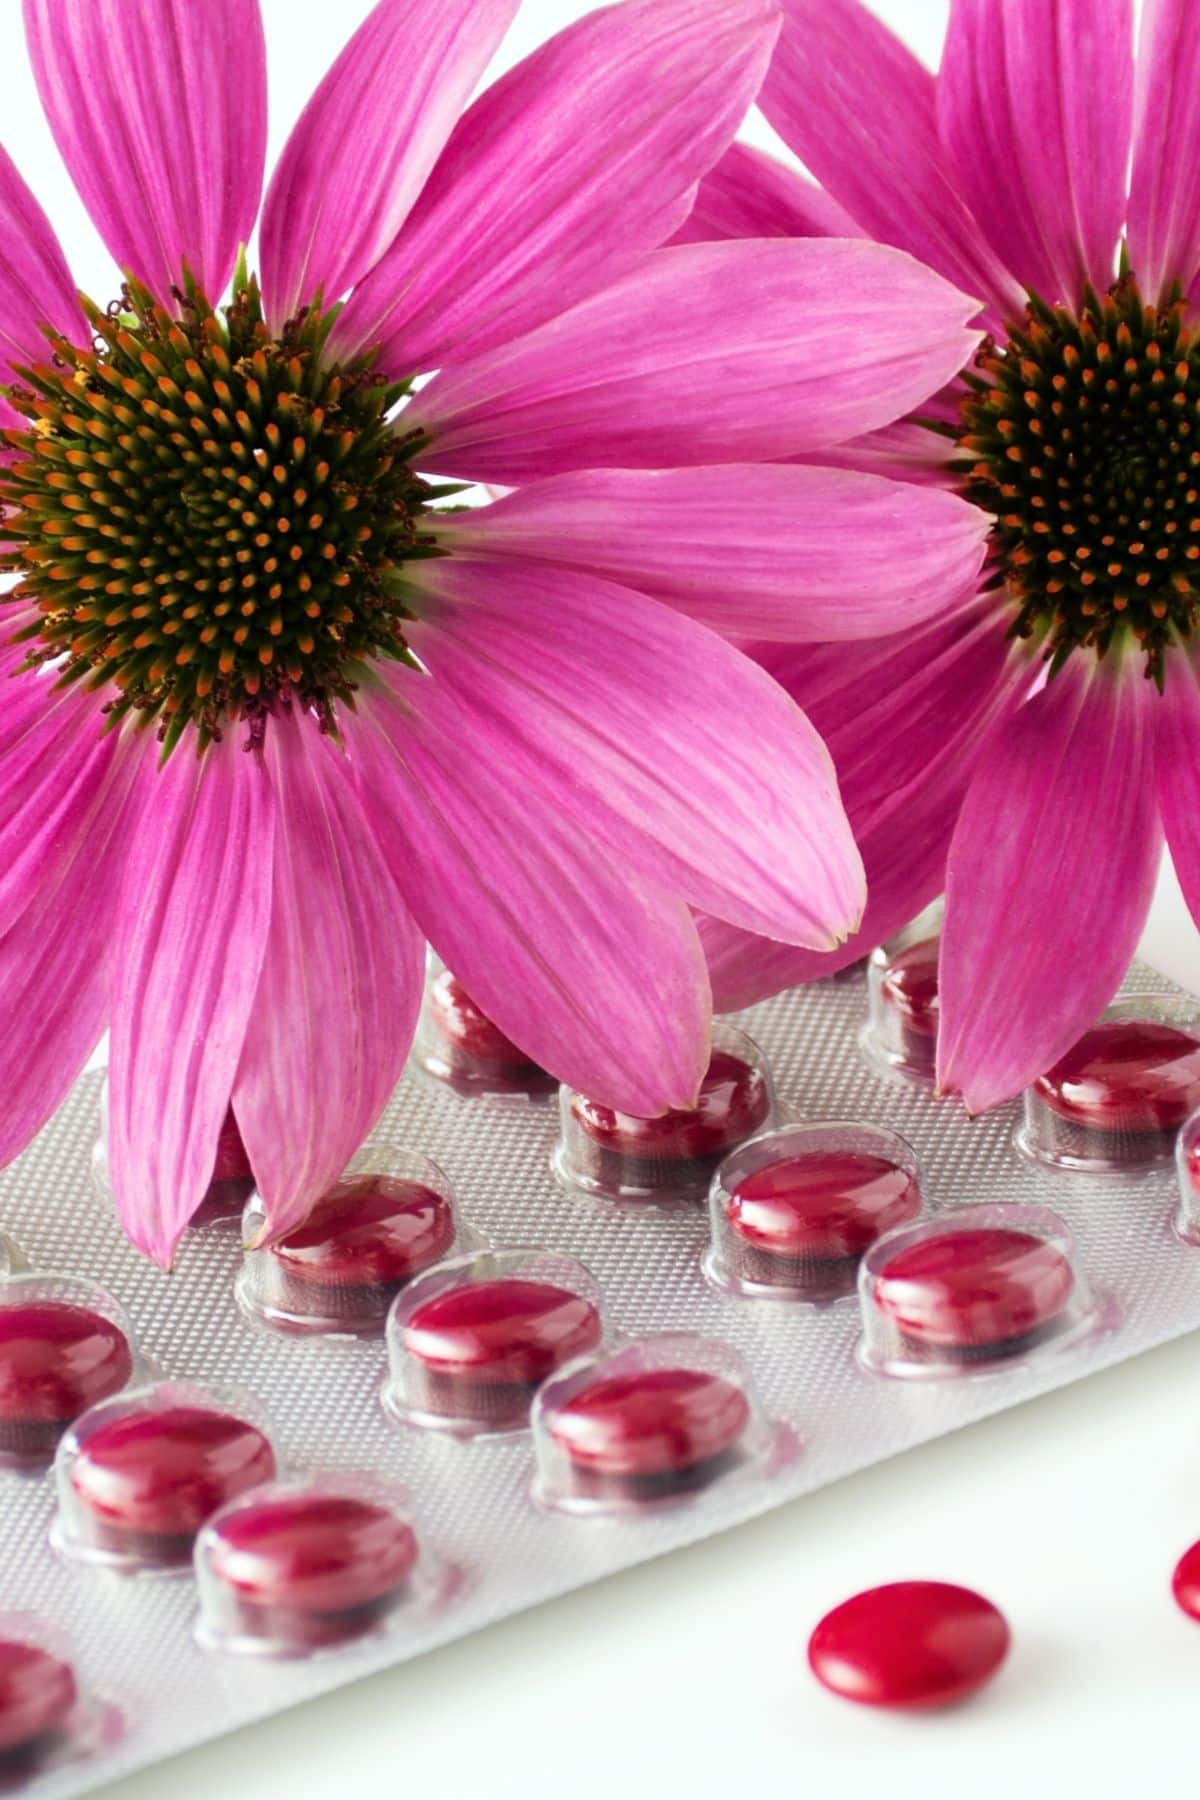 echinacea pills in front of the echinacea flowers.